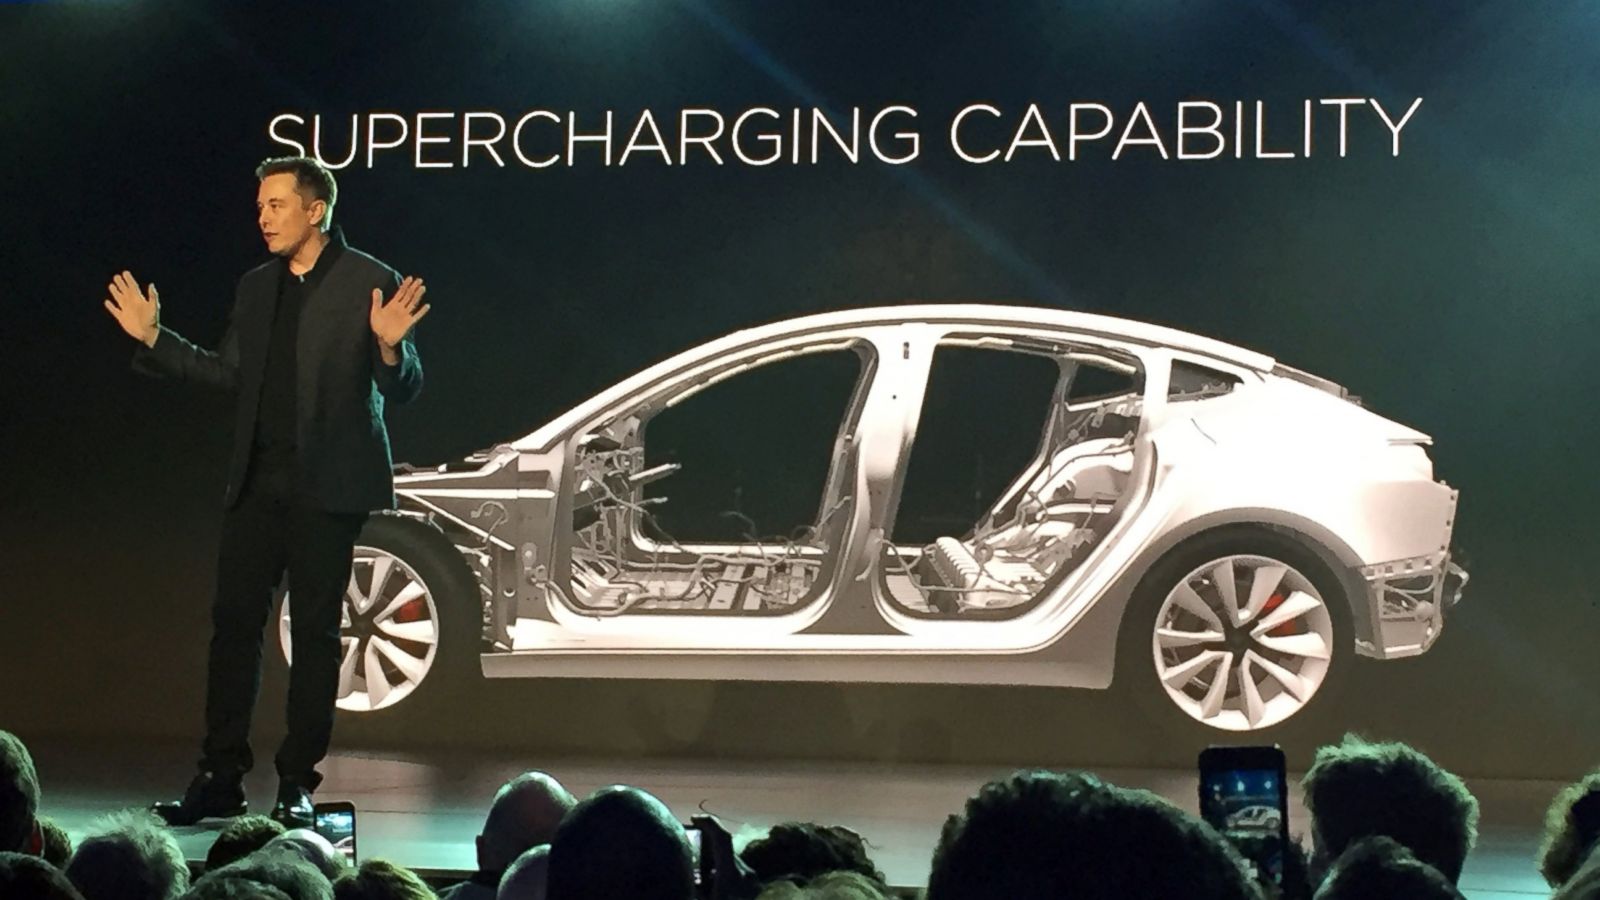 Tesla fans react strongly to reveal of new Model 3: 'It's enough